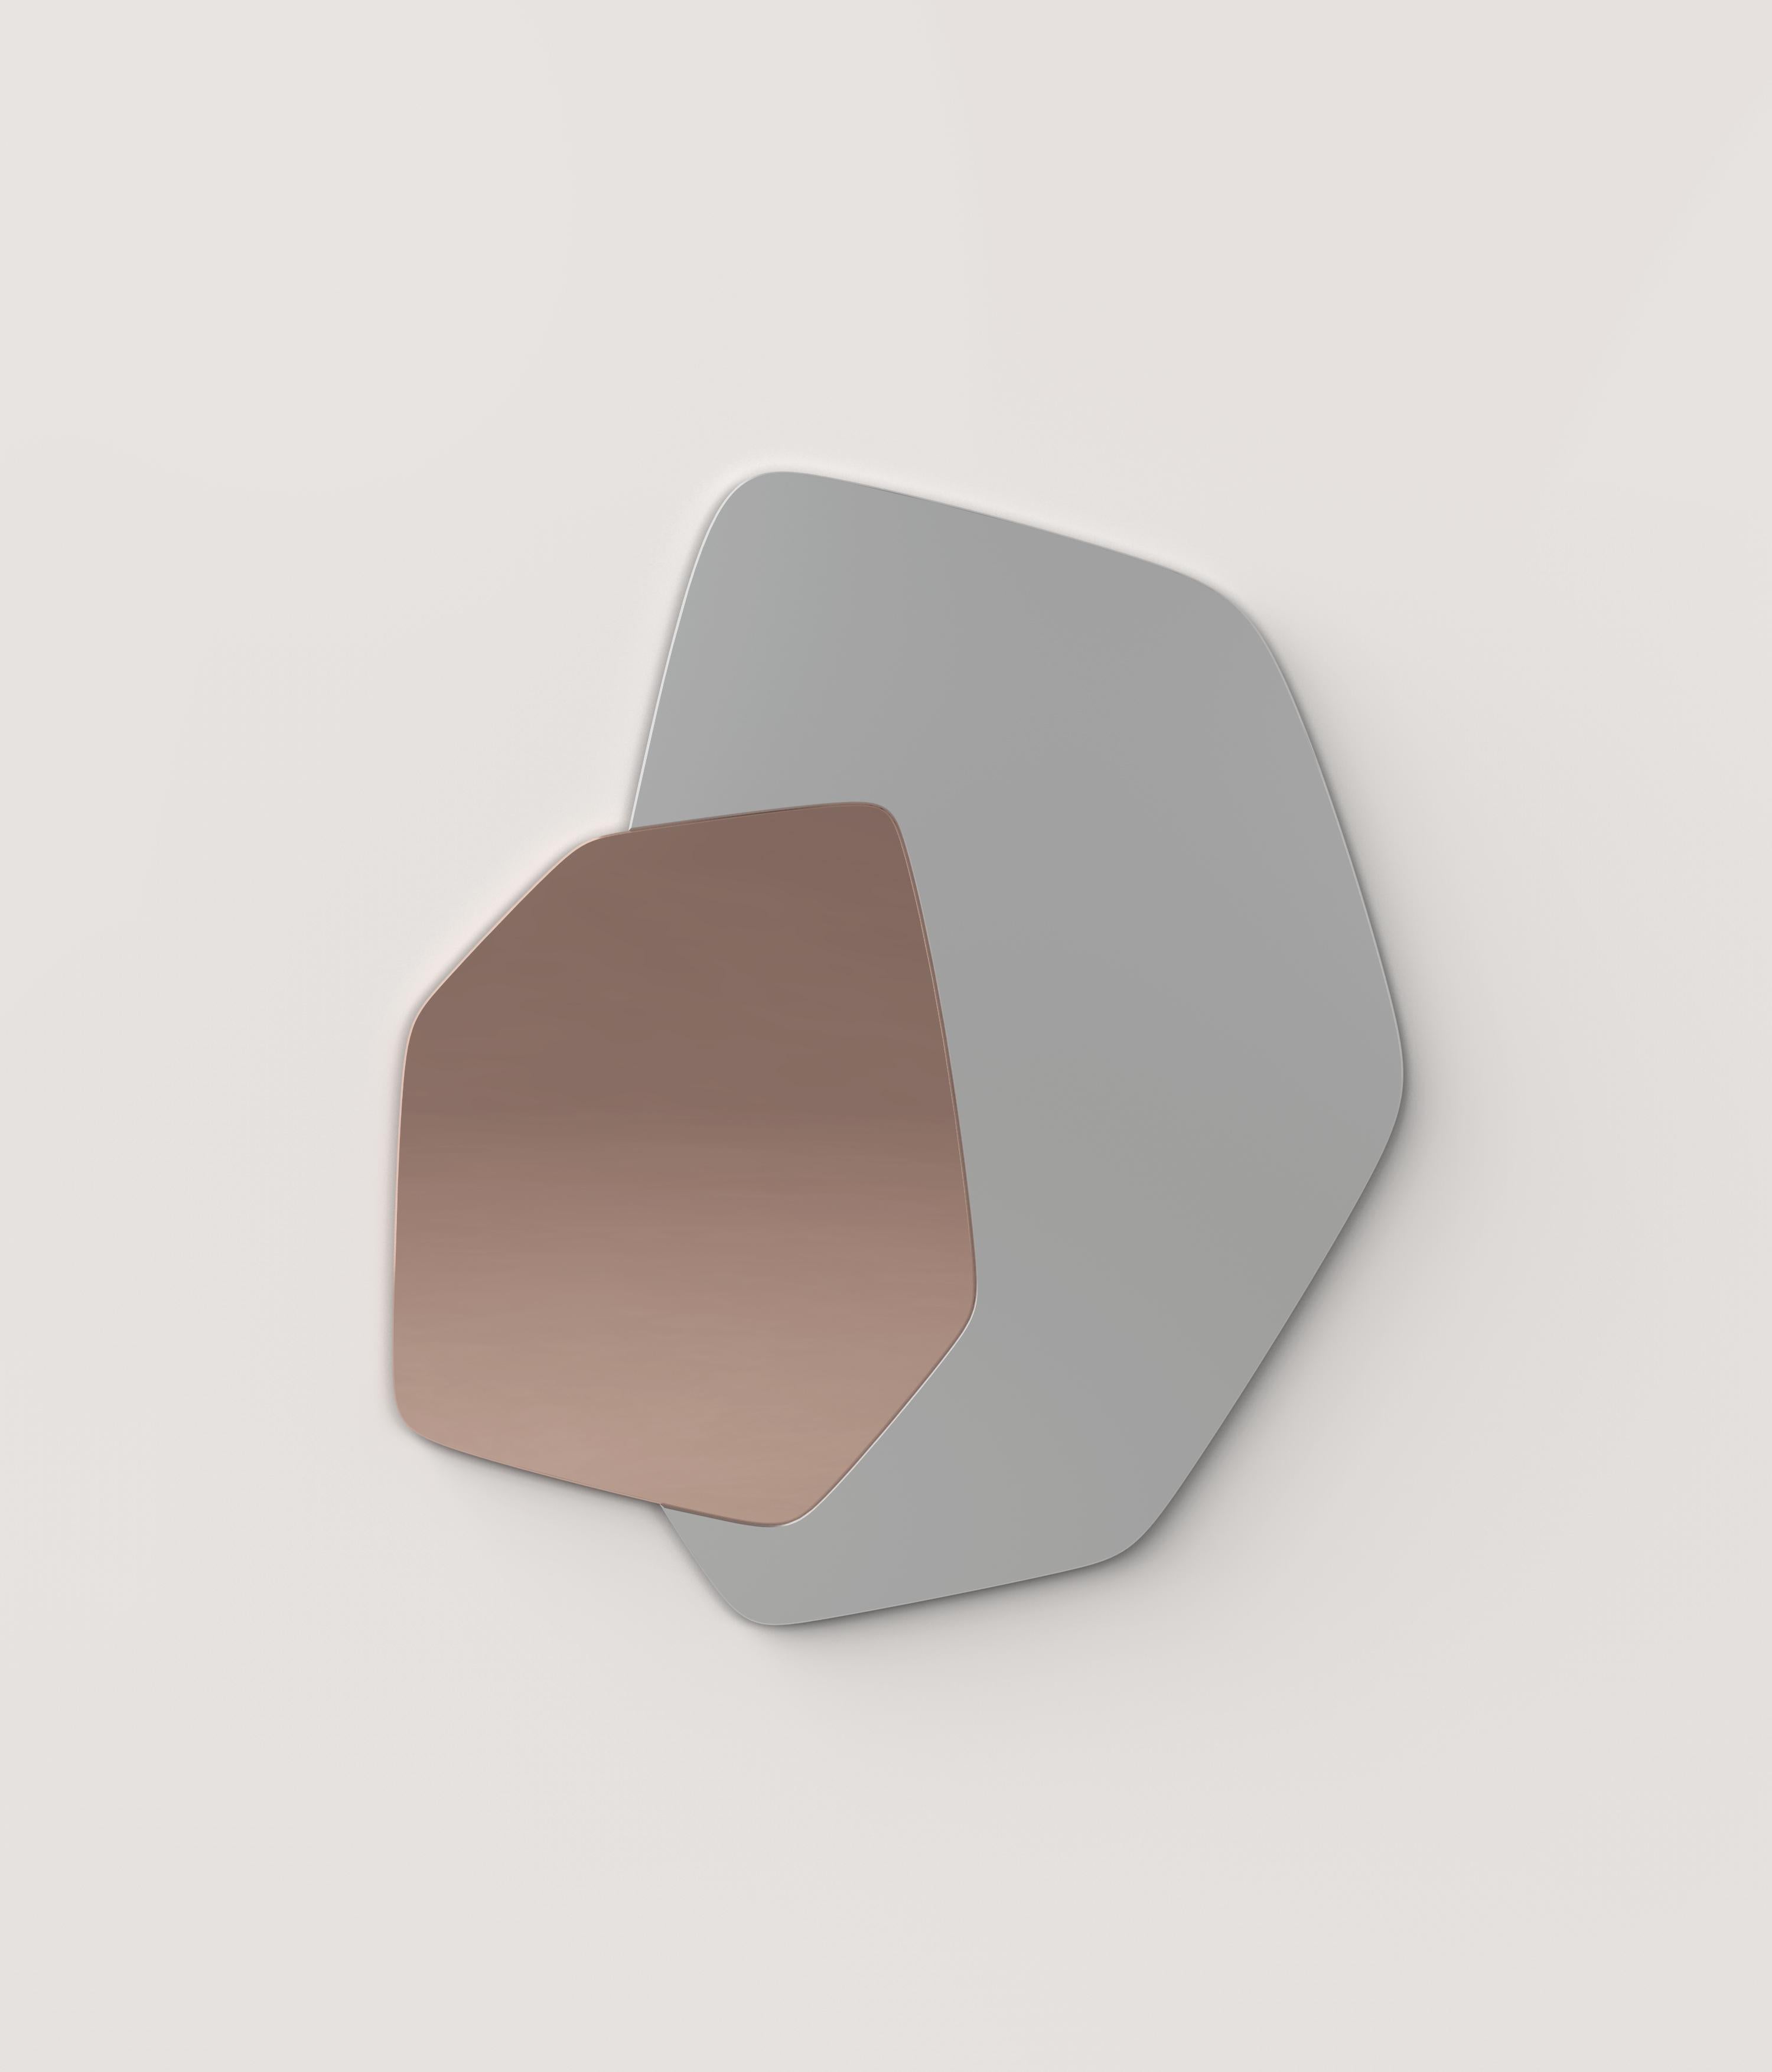 Nori V1 wall mirror by Edizione Limitata
Limited edition of 1000 pieces. Signed and numbered.
Dimensions: D70 x W0.5 x H79.5 cm
Materials: classic finish mirror+ copper finish mirror
Also available in different colours and dimensions.

Nori is